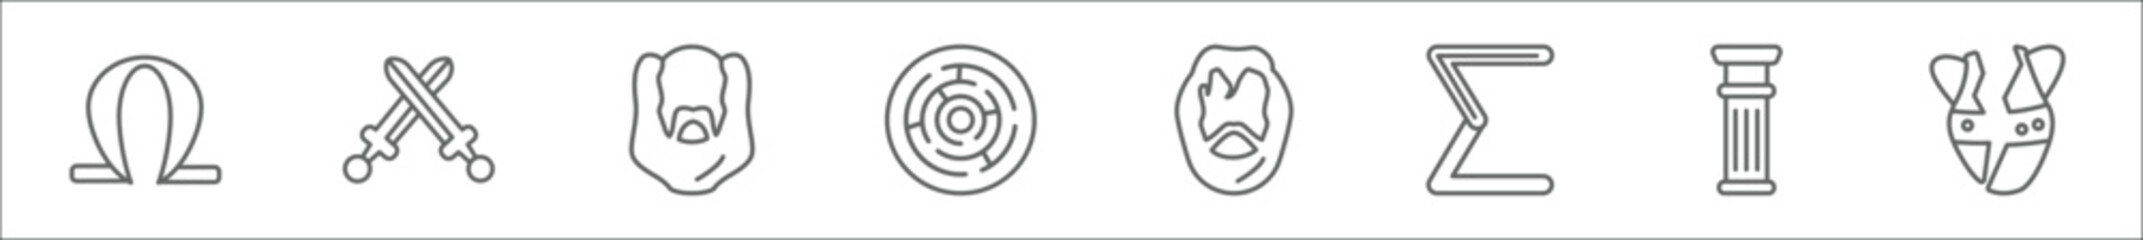 outline set of greece line icons. linear vector icons such as omega, xifos, socrates, labyrinth, aristotle, sigma, pillar, broken amphora